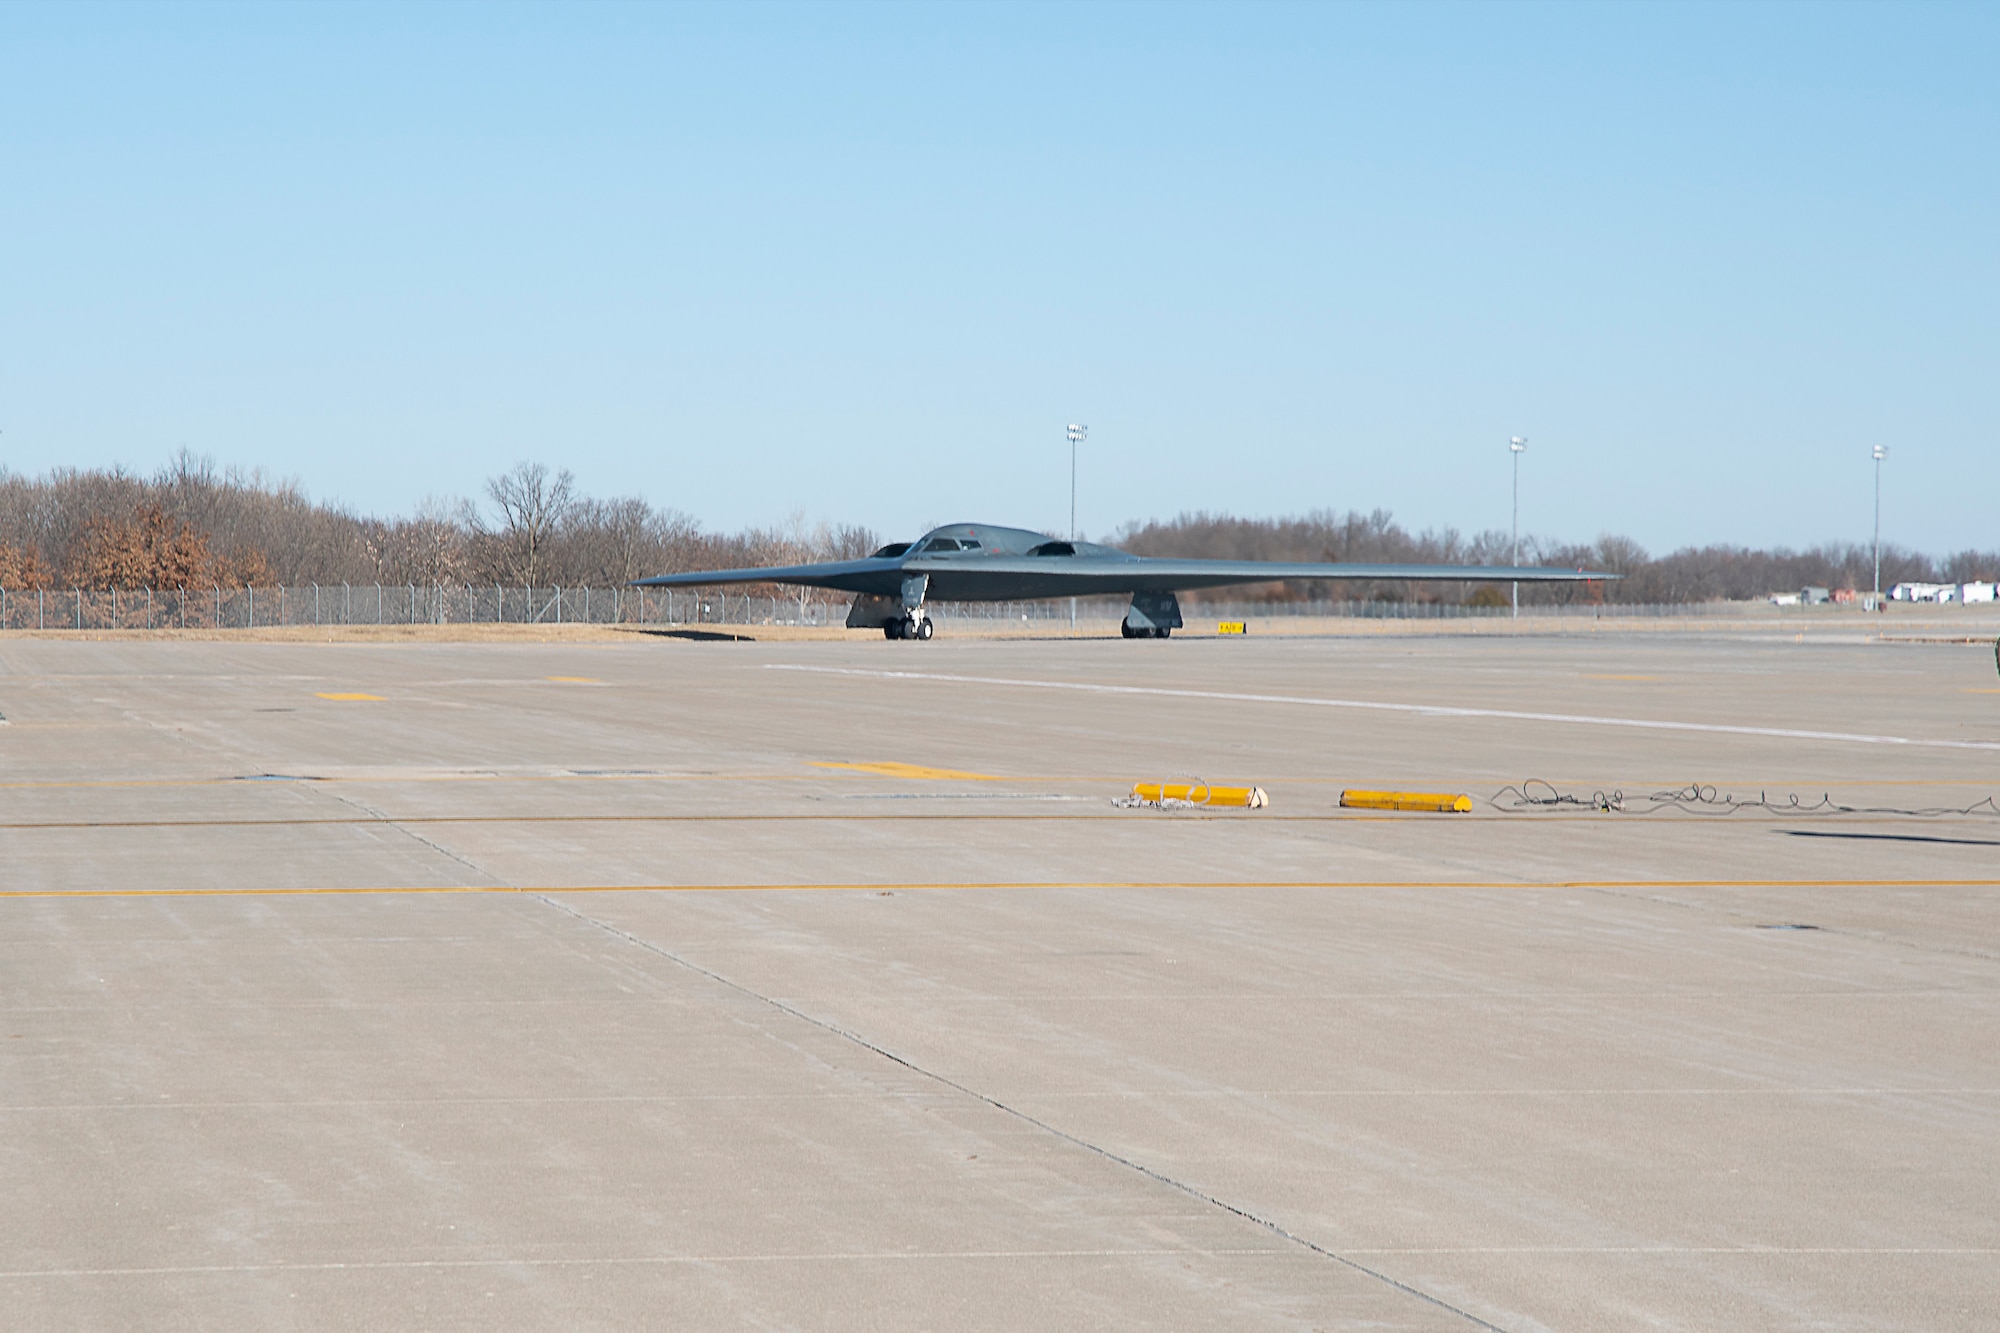 Master Sgt. Joshua Upton taxies on the tarmac in a B-2 Spirit stealth bomber at Whiteman Air Force Base, Missouri, Jan 9, 2022. Upton, the wing's Maintainer of the Year, earned an inventive ride in the aircraft due to his exemplary work throughout 2021. (U.S. Air National Guard photo, 131st Bomb Wing Public Affairs)